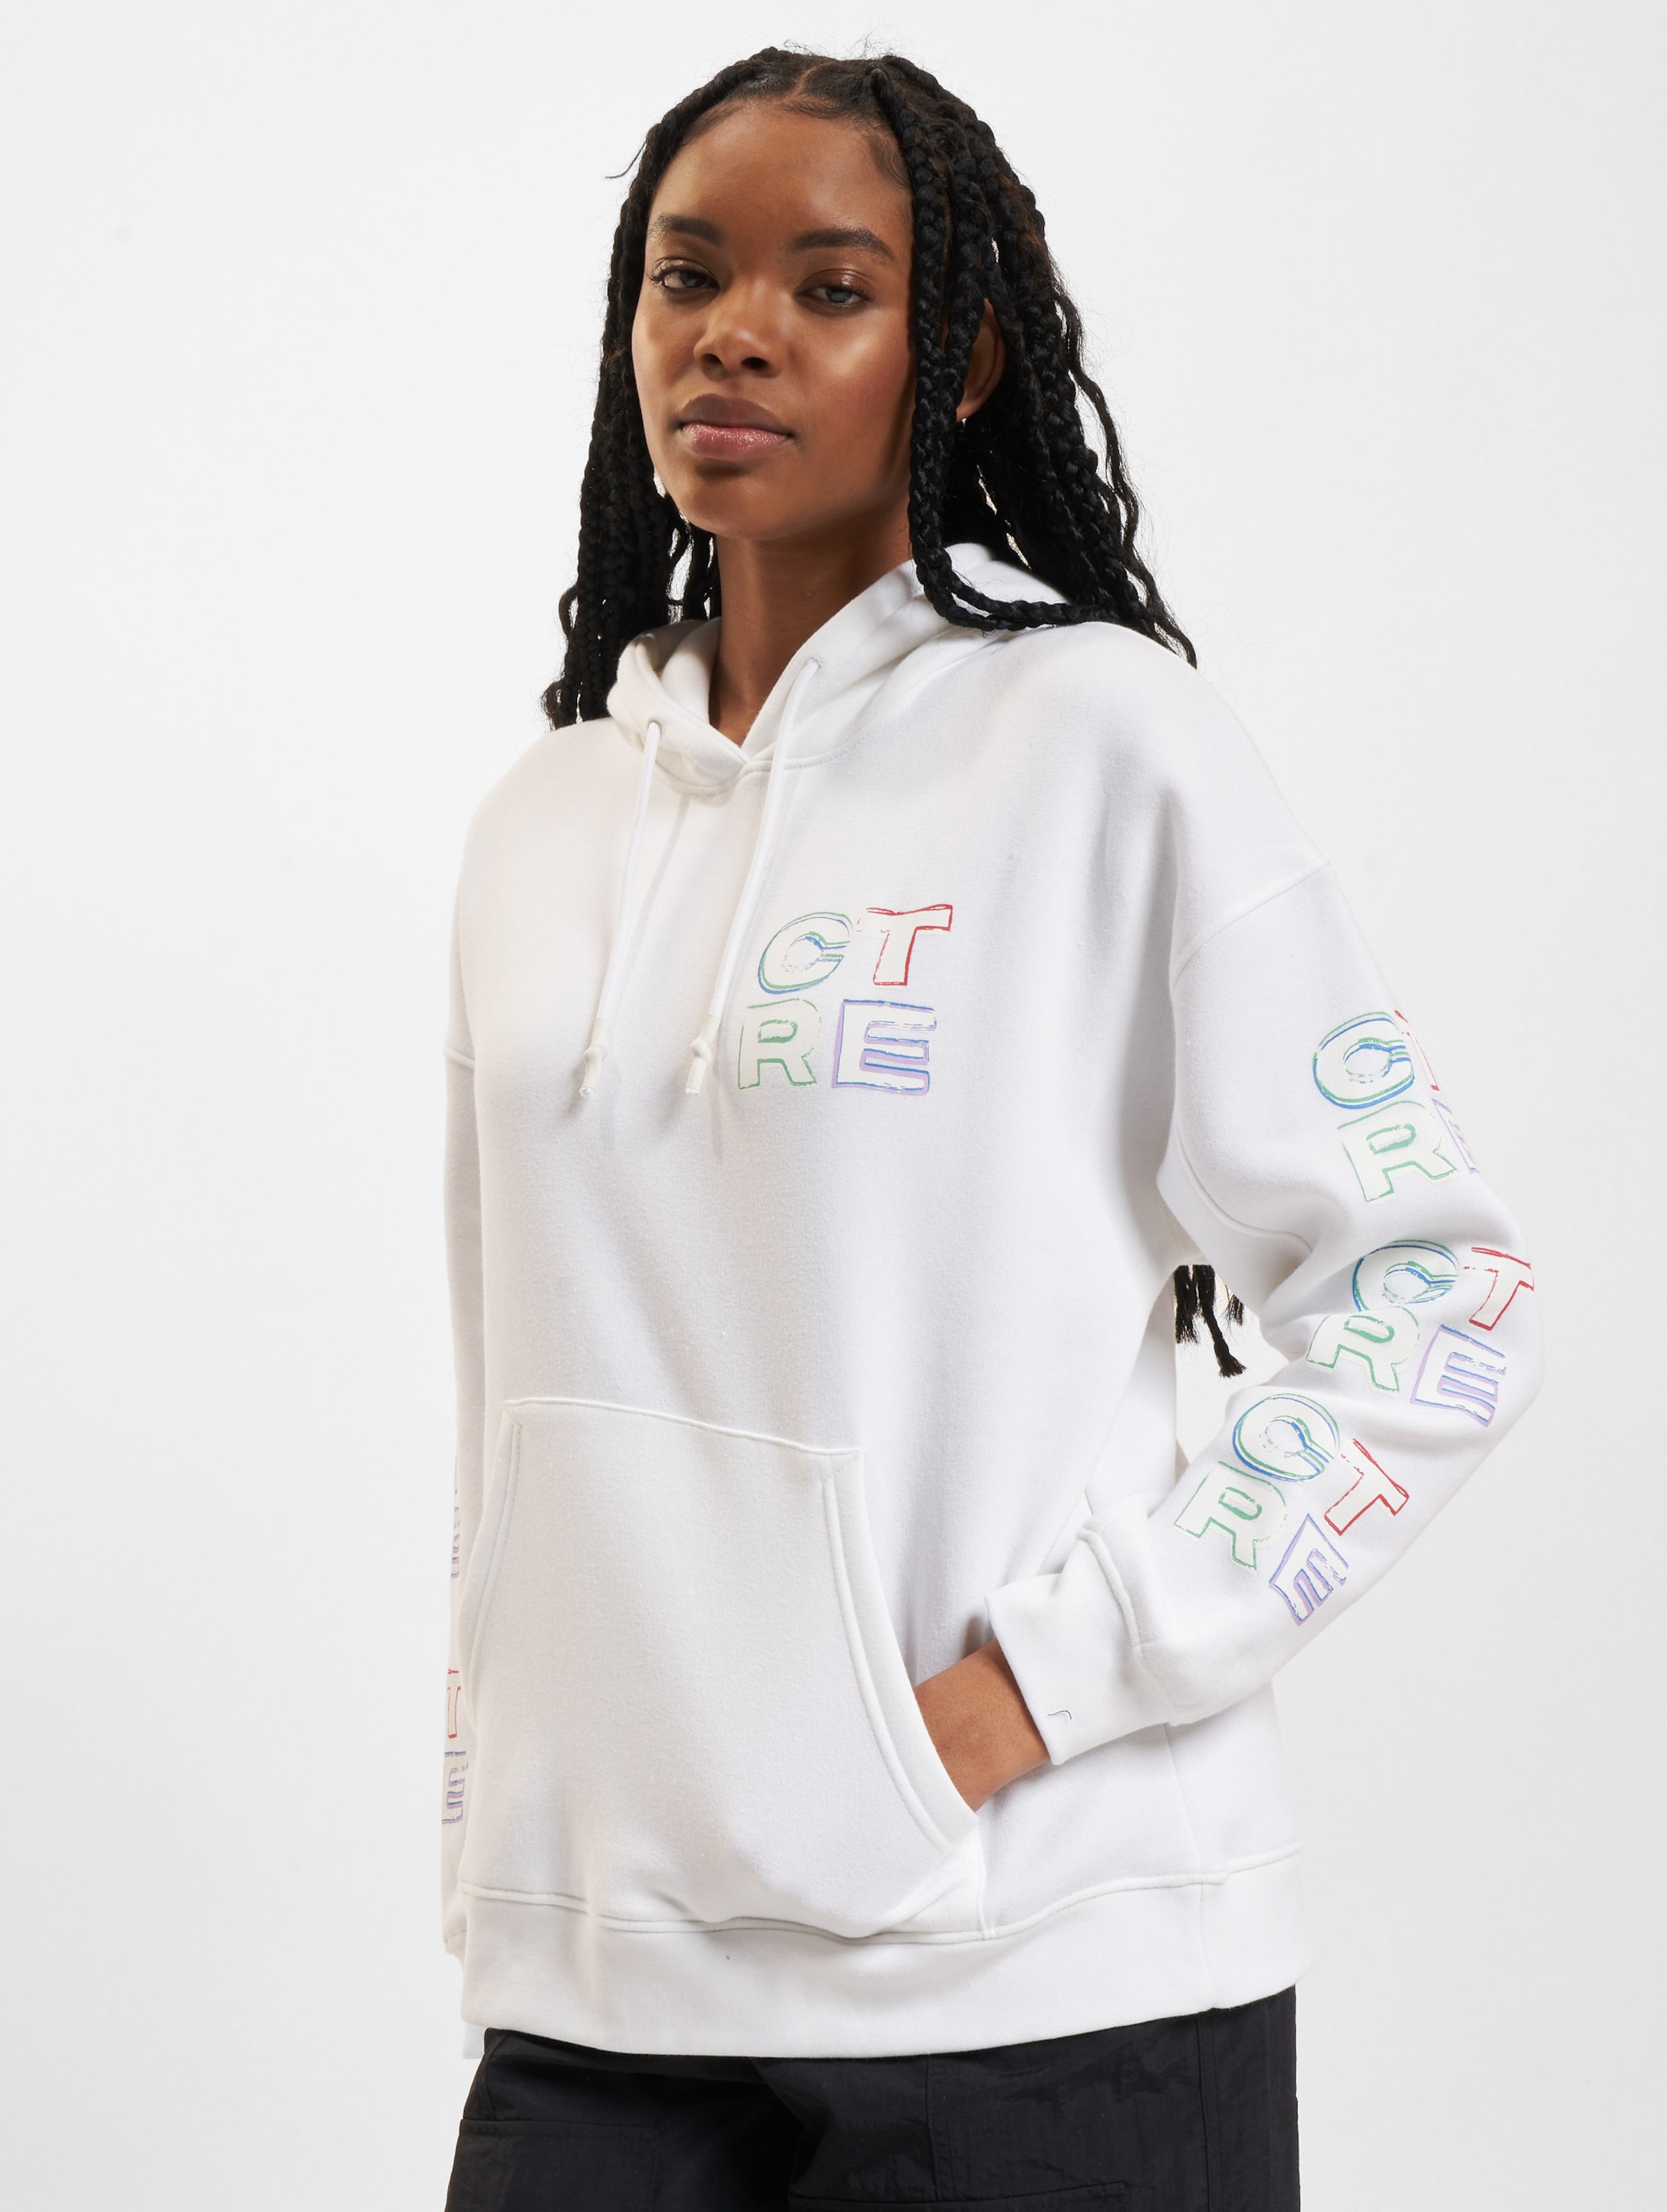 The Couture Club Multi Coloured Graphic Oversized Hoodie Vrouwen op kleur wit, Maat M